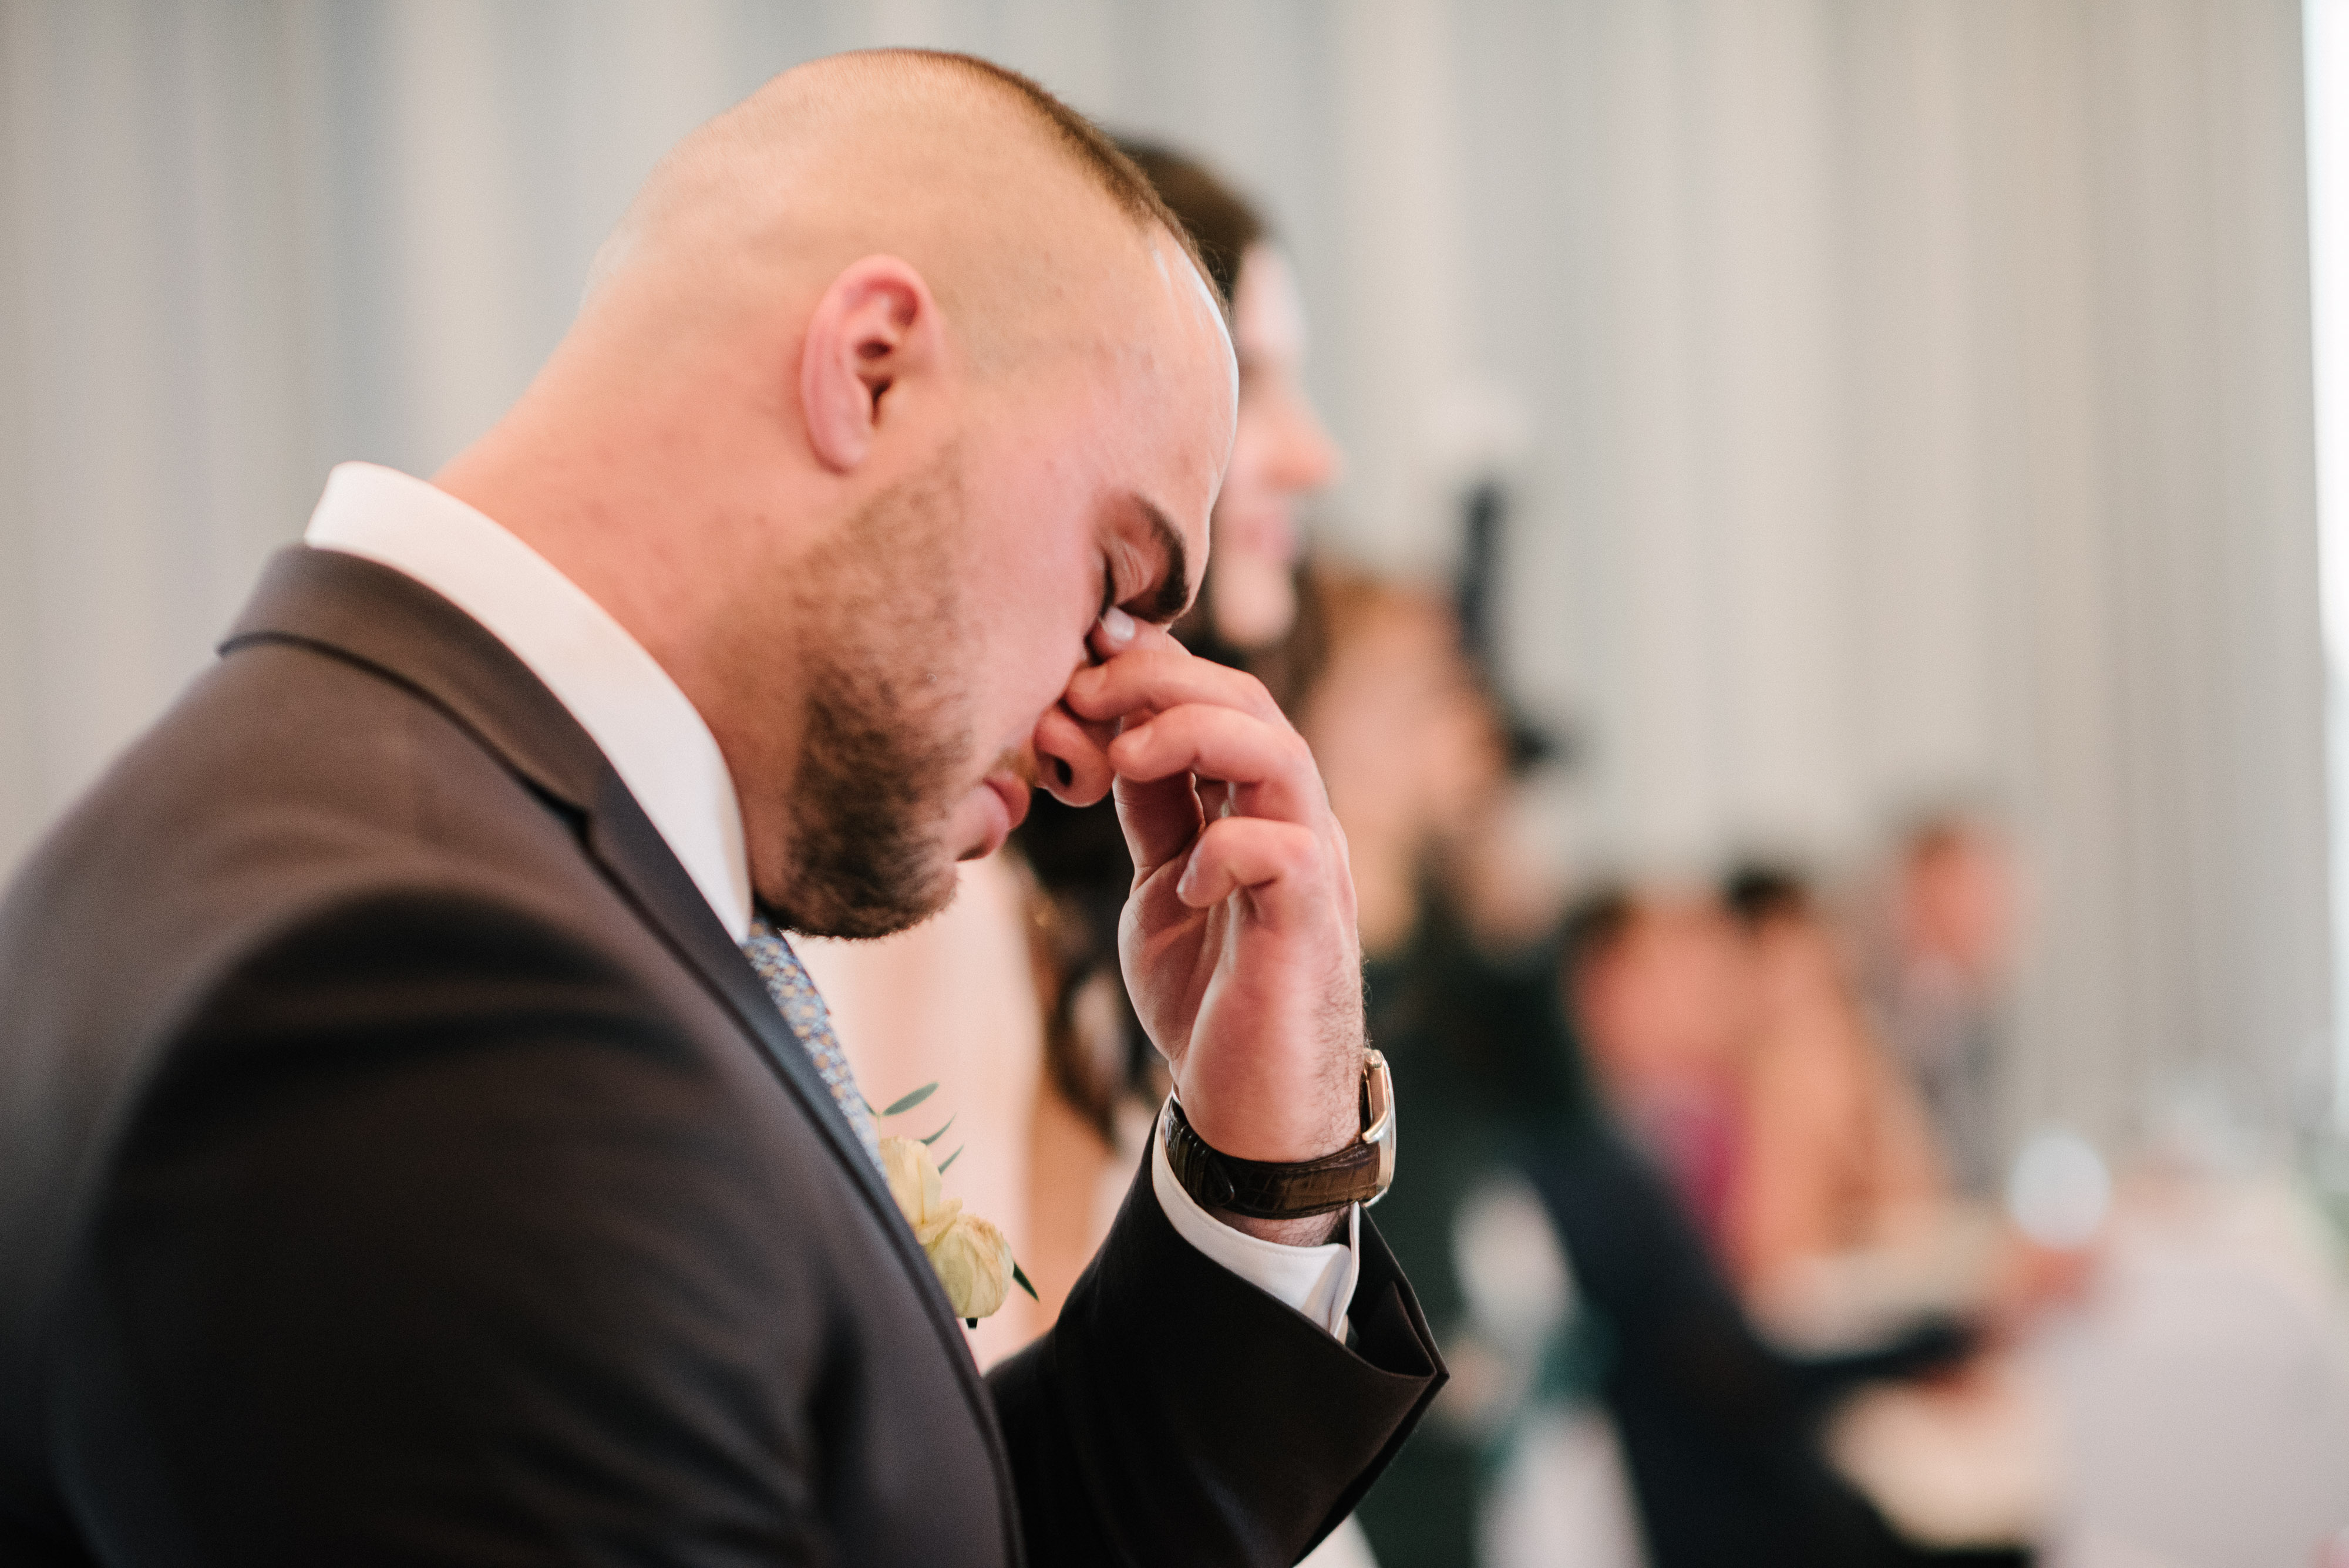 A man crying at his wedding | Source: Shutterstock